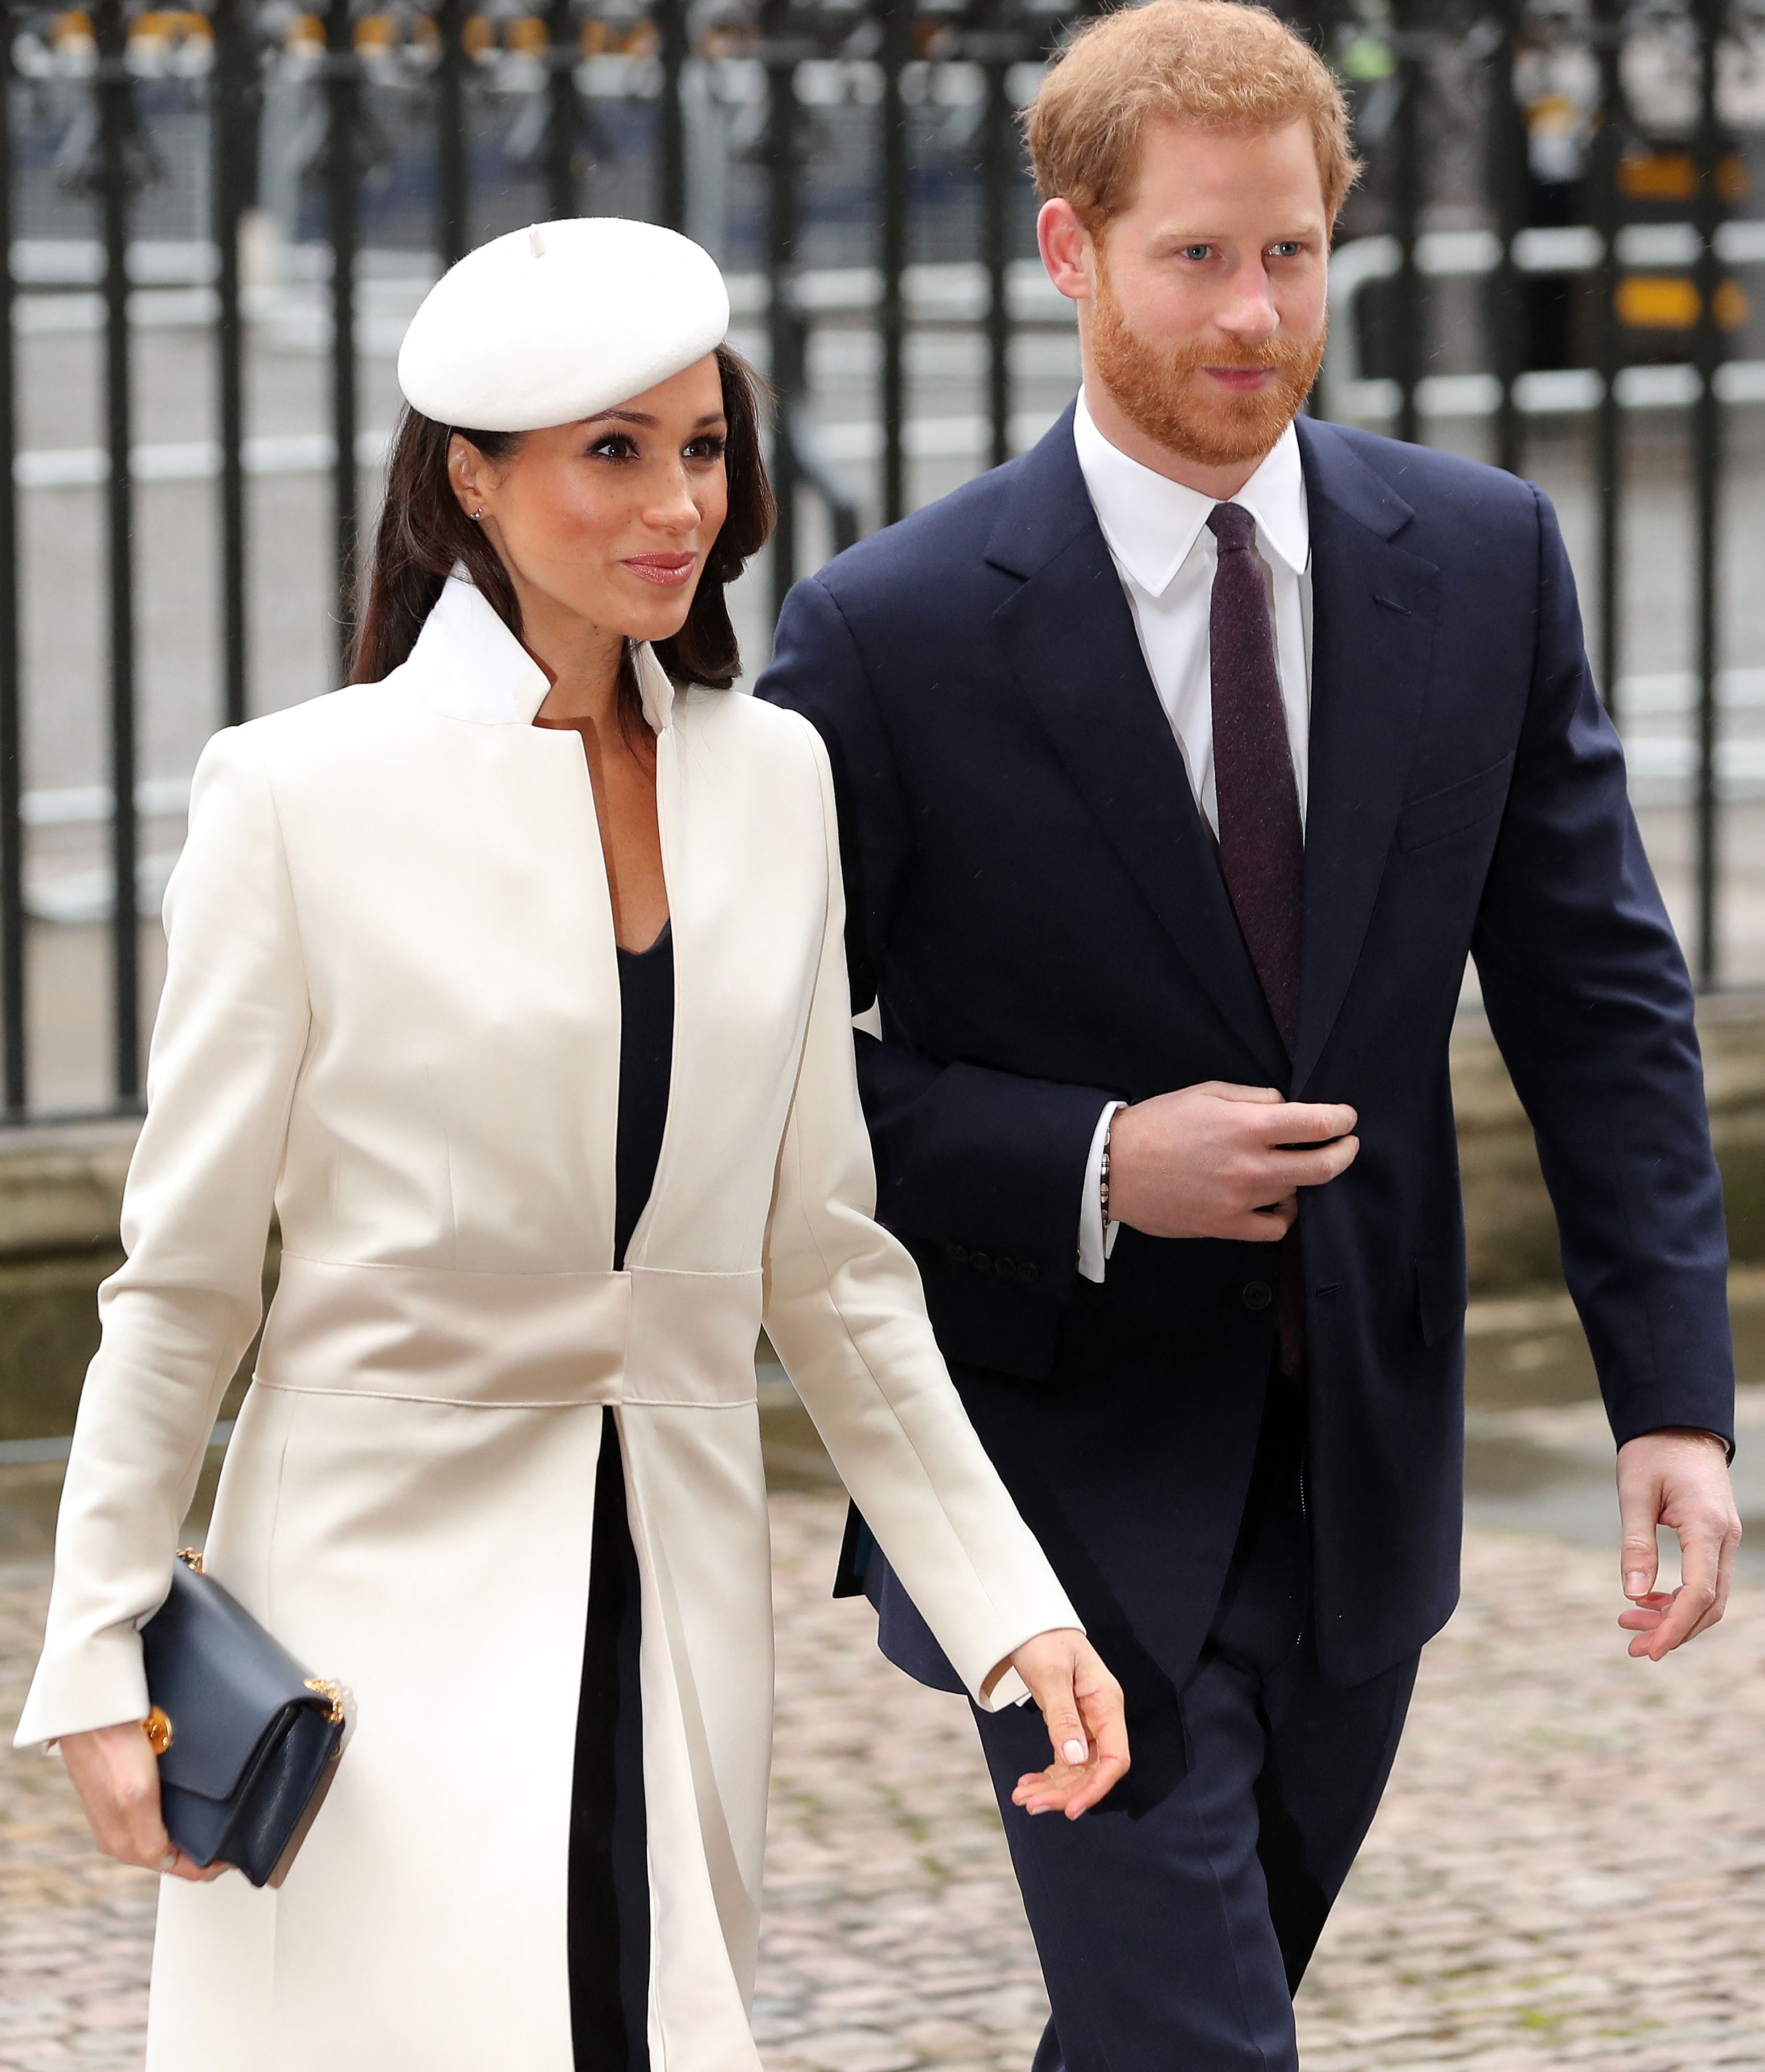 Prince Harry and Meghan Markle, who won't be able to film for their Netflix docuseries during the Jubilee, photographed at the 2018 Commonwealth Day Service